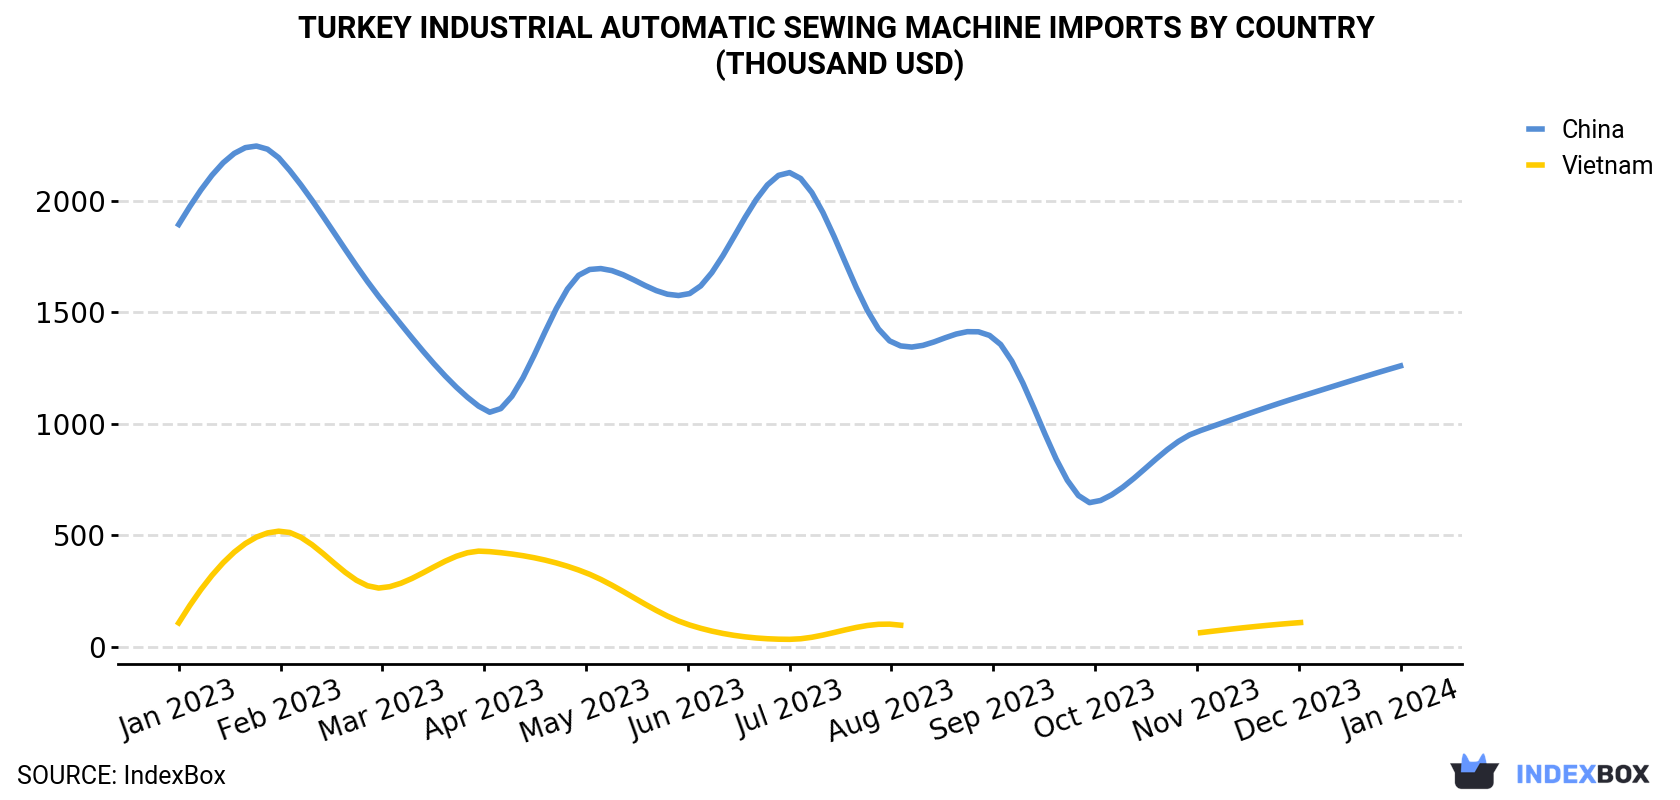 Turkey Industrial Automatic Sewing Machine Imports By Country (Thousand USD)